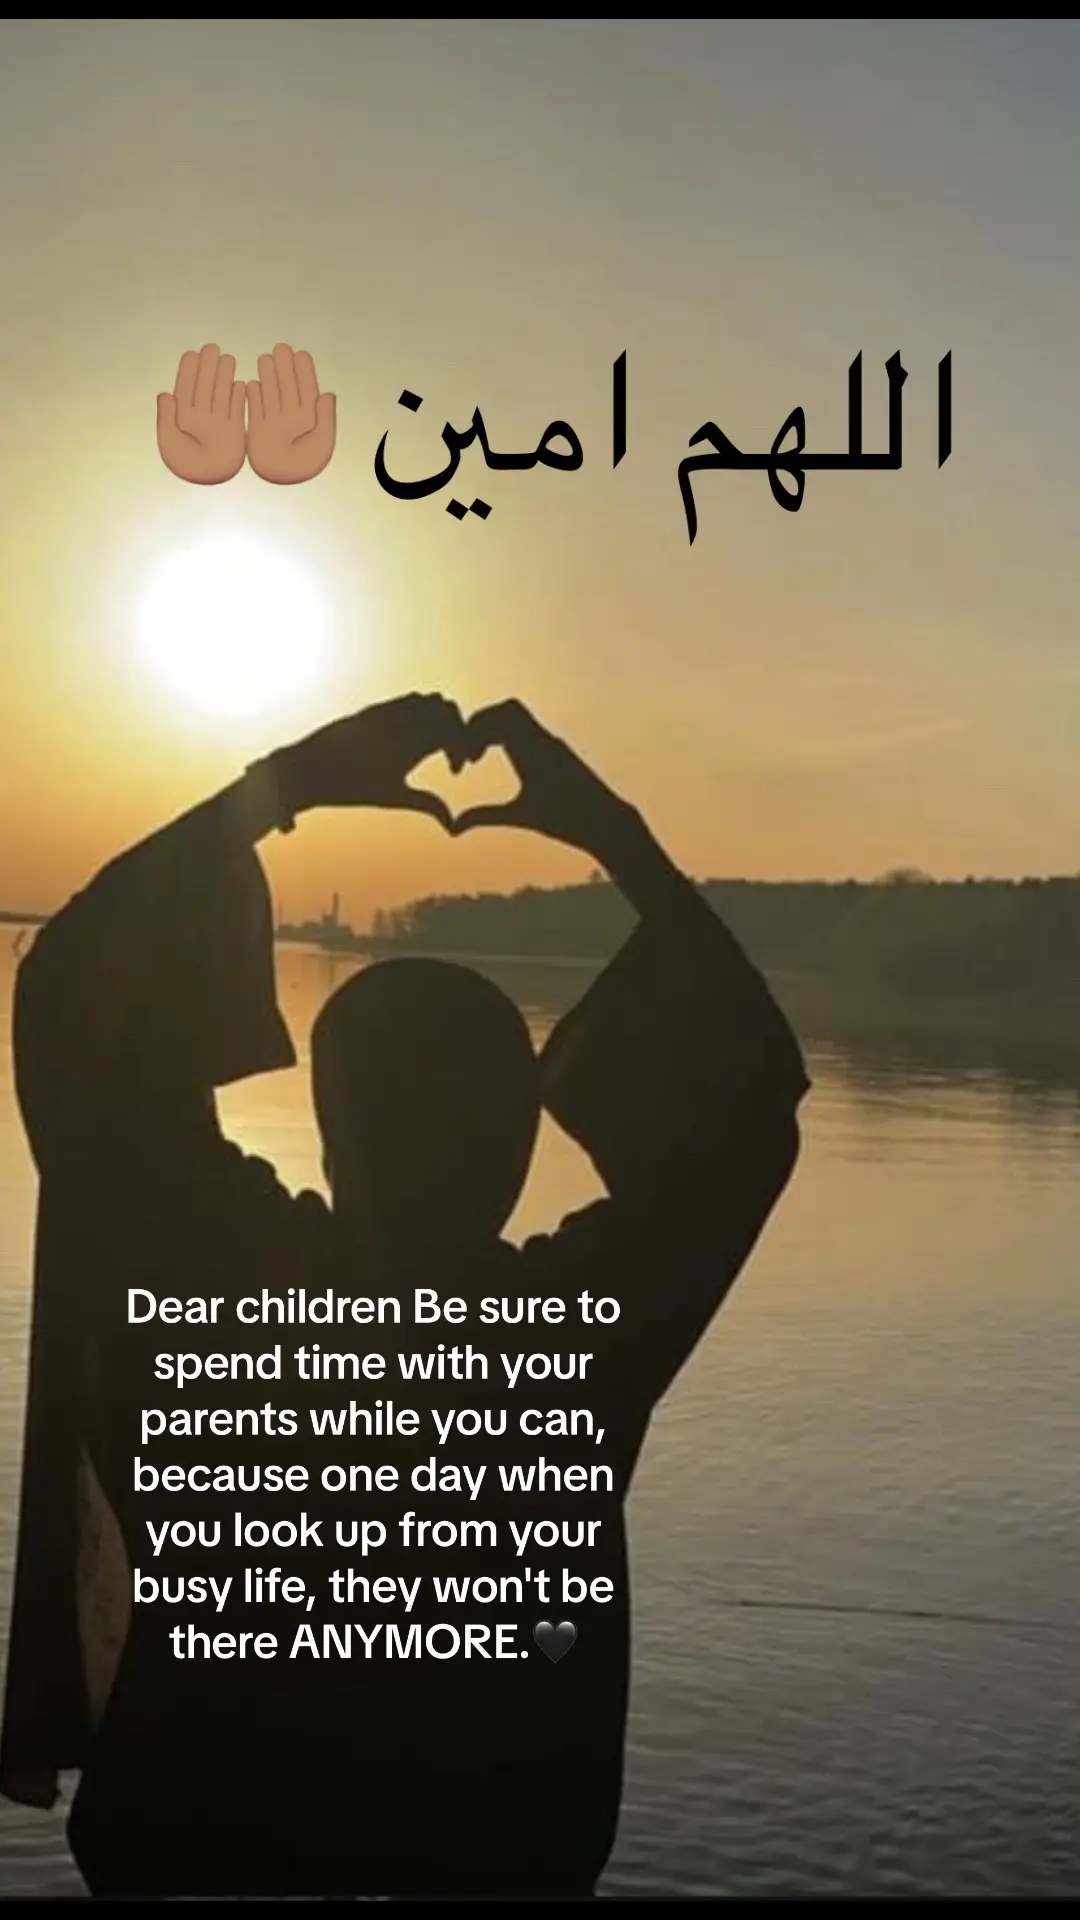 Dear children Be sure to spend time with your parents while you can, because one day when you look up from your busy life, they won't be there ANYMORE.🖤#LIVEhighlights #deenoverdunya #oromotiktok #somalitiktok #svenskatiktok #muslimtiktok #allahswt #virall #frypgシ #for #👑 #🧕🏽 